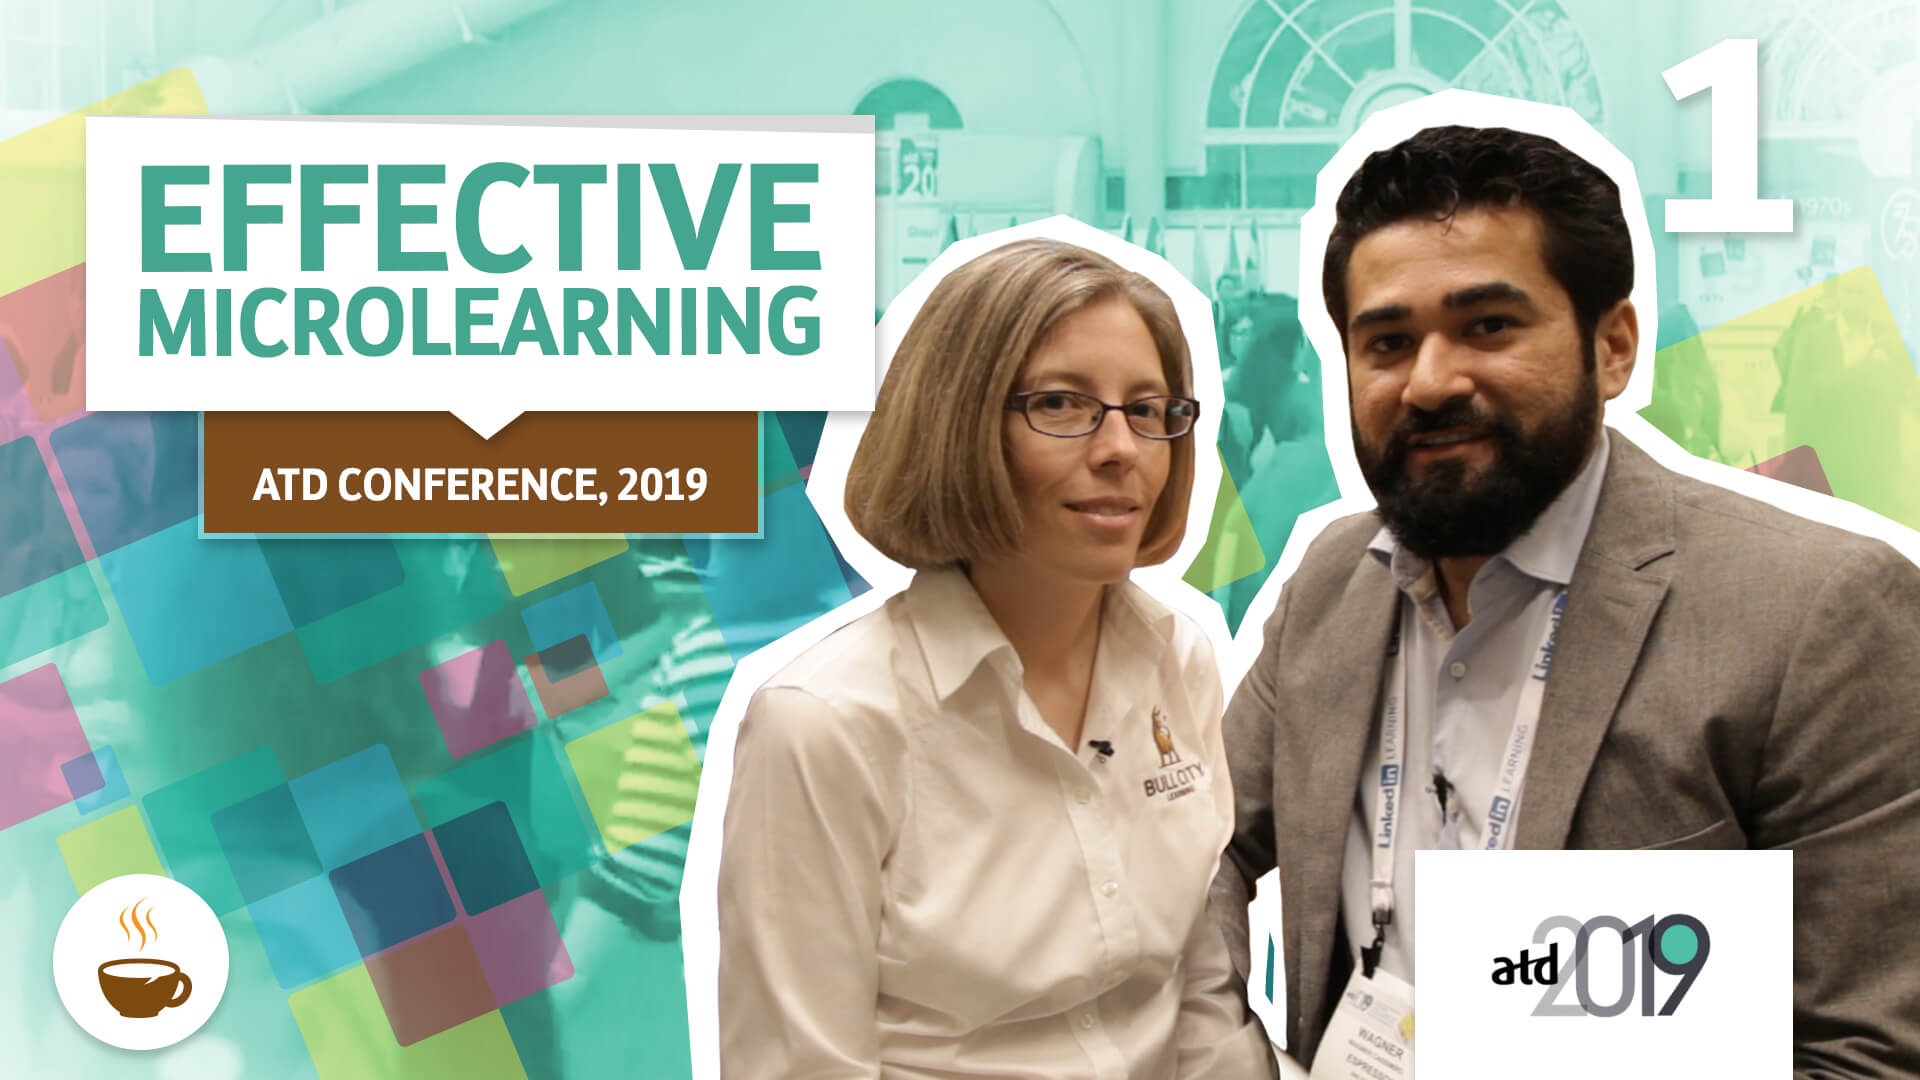 Wagner Cassimiro talking to Carla Torgerson about  Microlearning efetivo - ATD Conference, 2019 